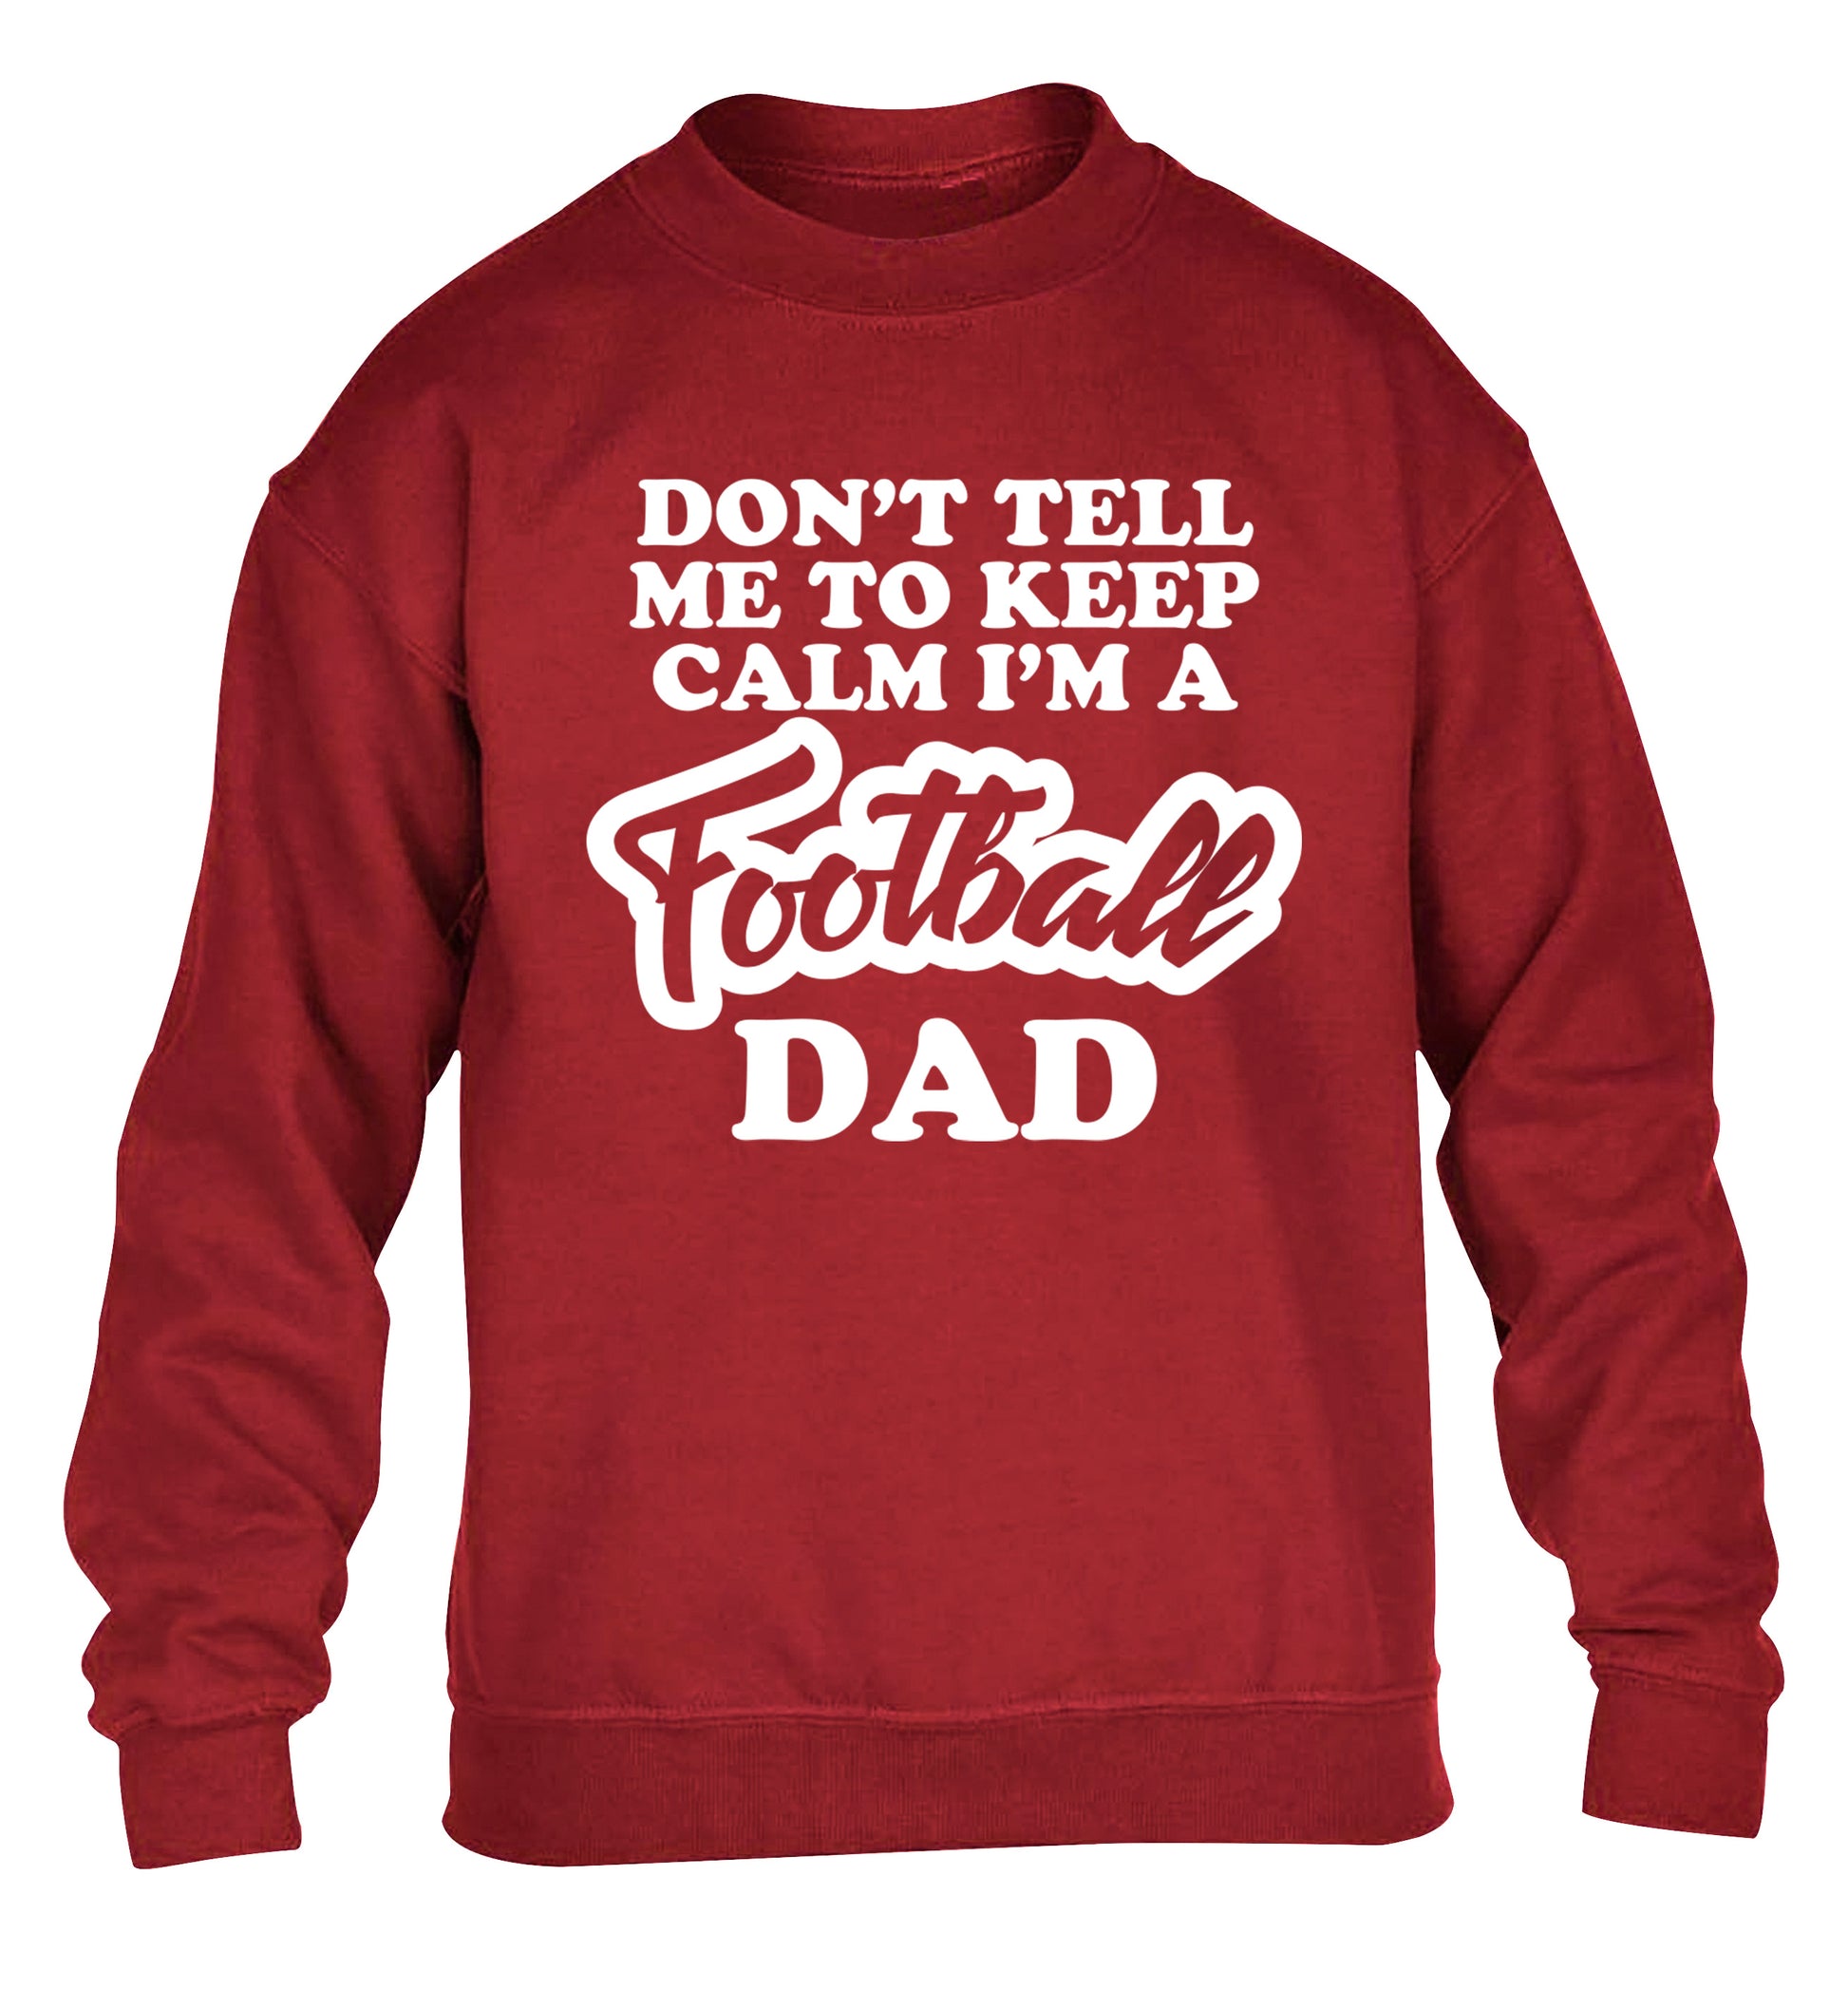 Don't tell me to keep calm I'm a football dad children's grey sweater 12-14 Years